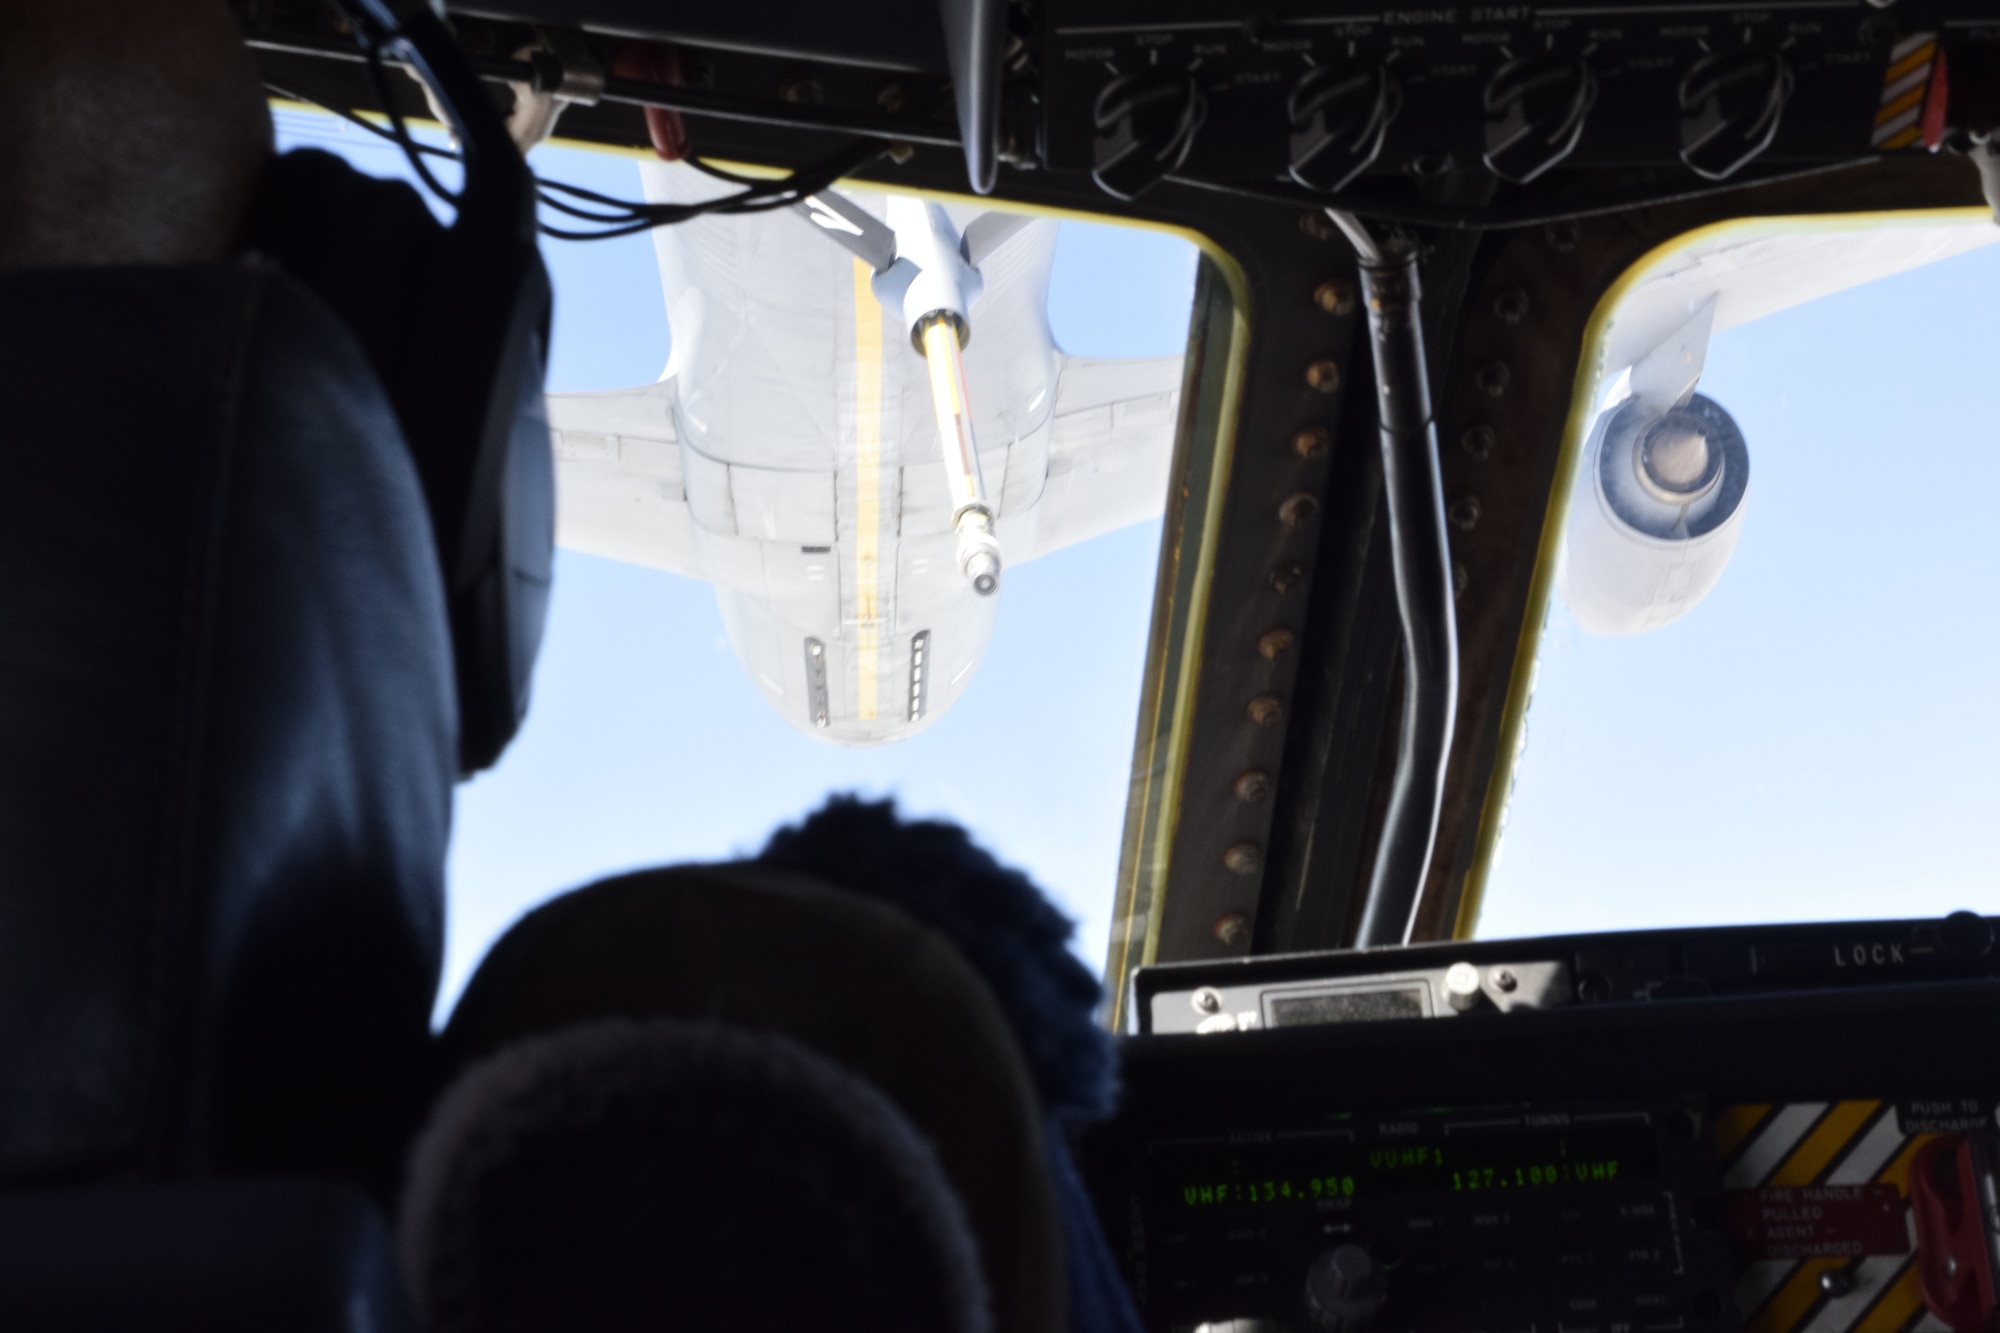 A C-5M Super Galaxy aircraft is piloted into position for in-flight refueling from a KC-135R Stratotanker during a local training flight over Texas. The KC-135R is from the 507th Air Refueling Wing, Tinker Air Force Base, Oklahoma. (U.S. Air Force photo by Senior Airman Brittany Wich)